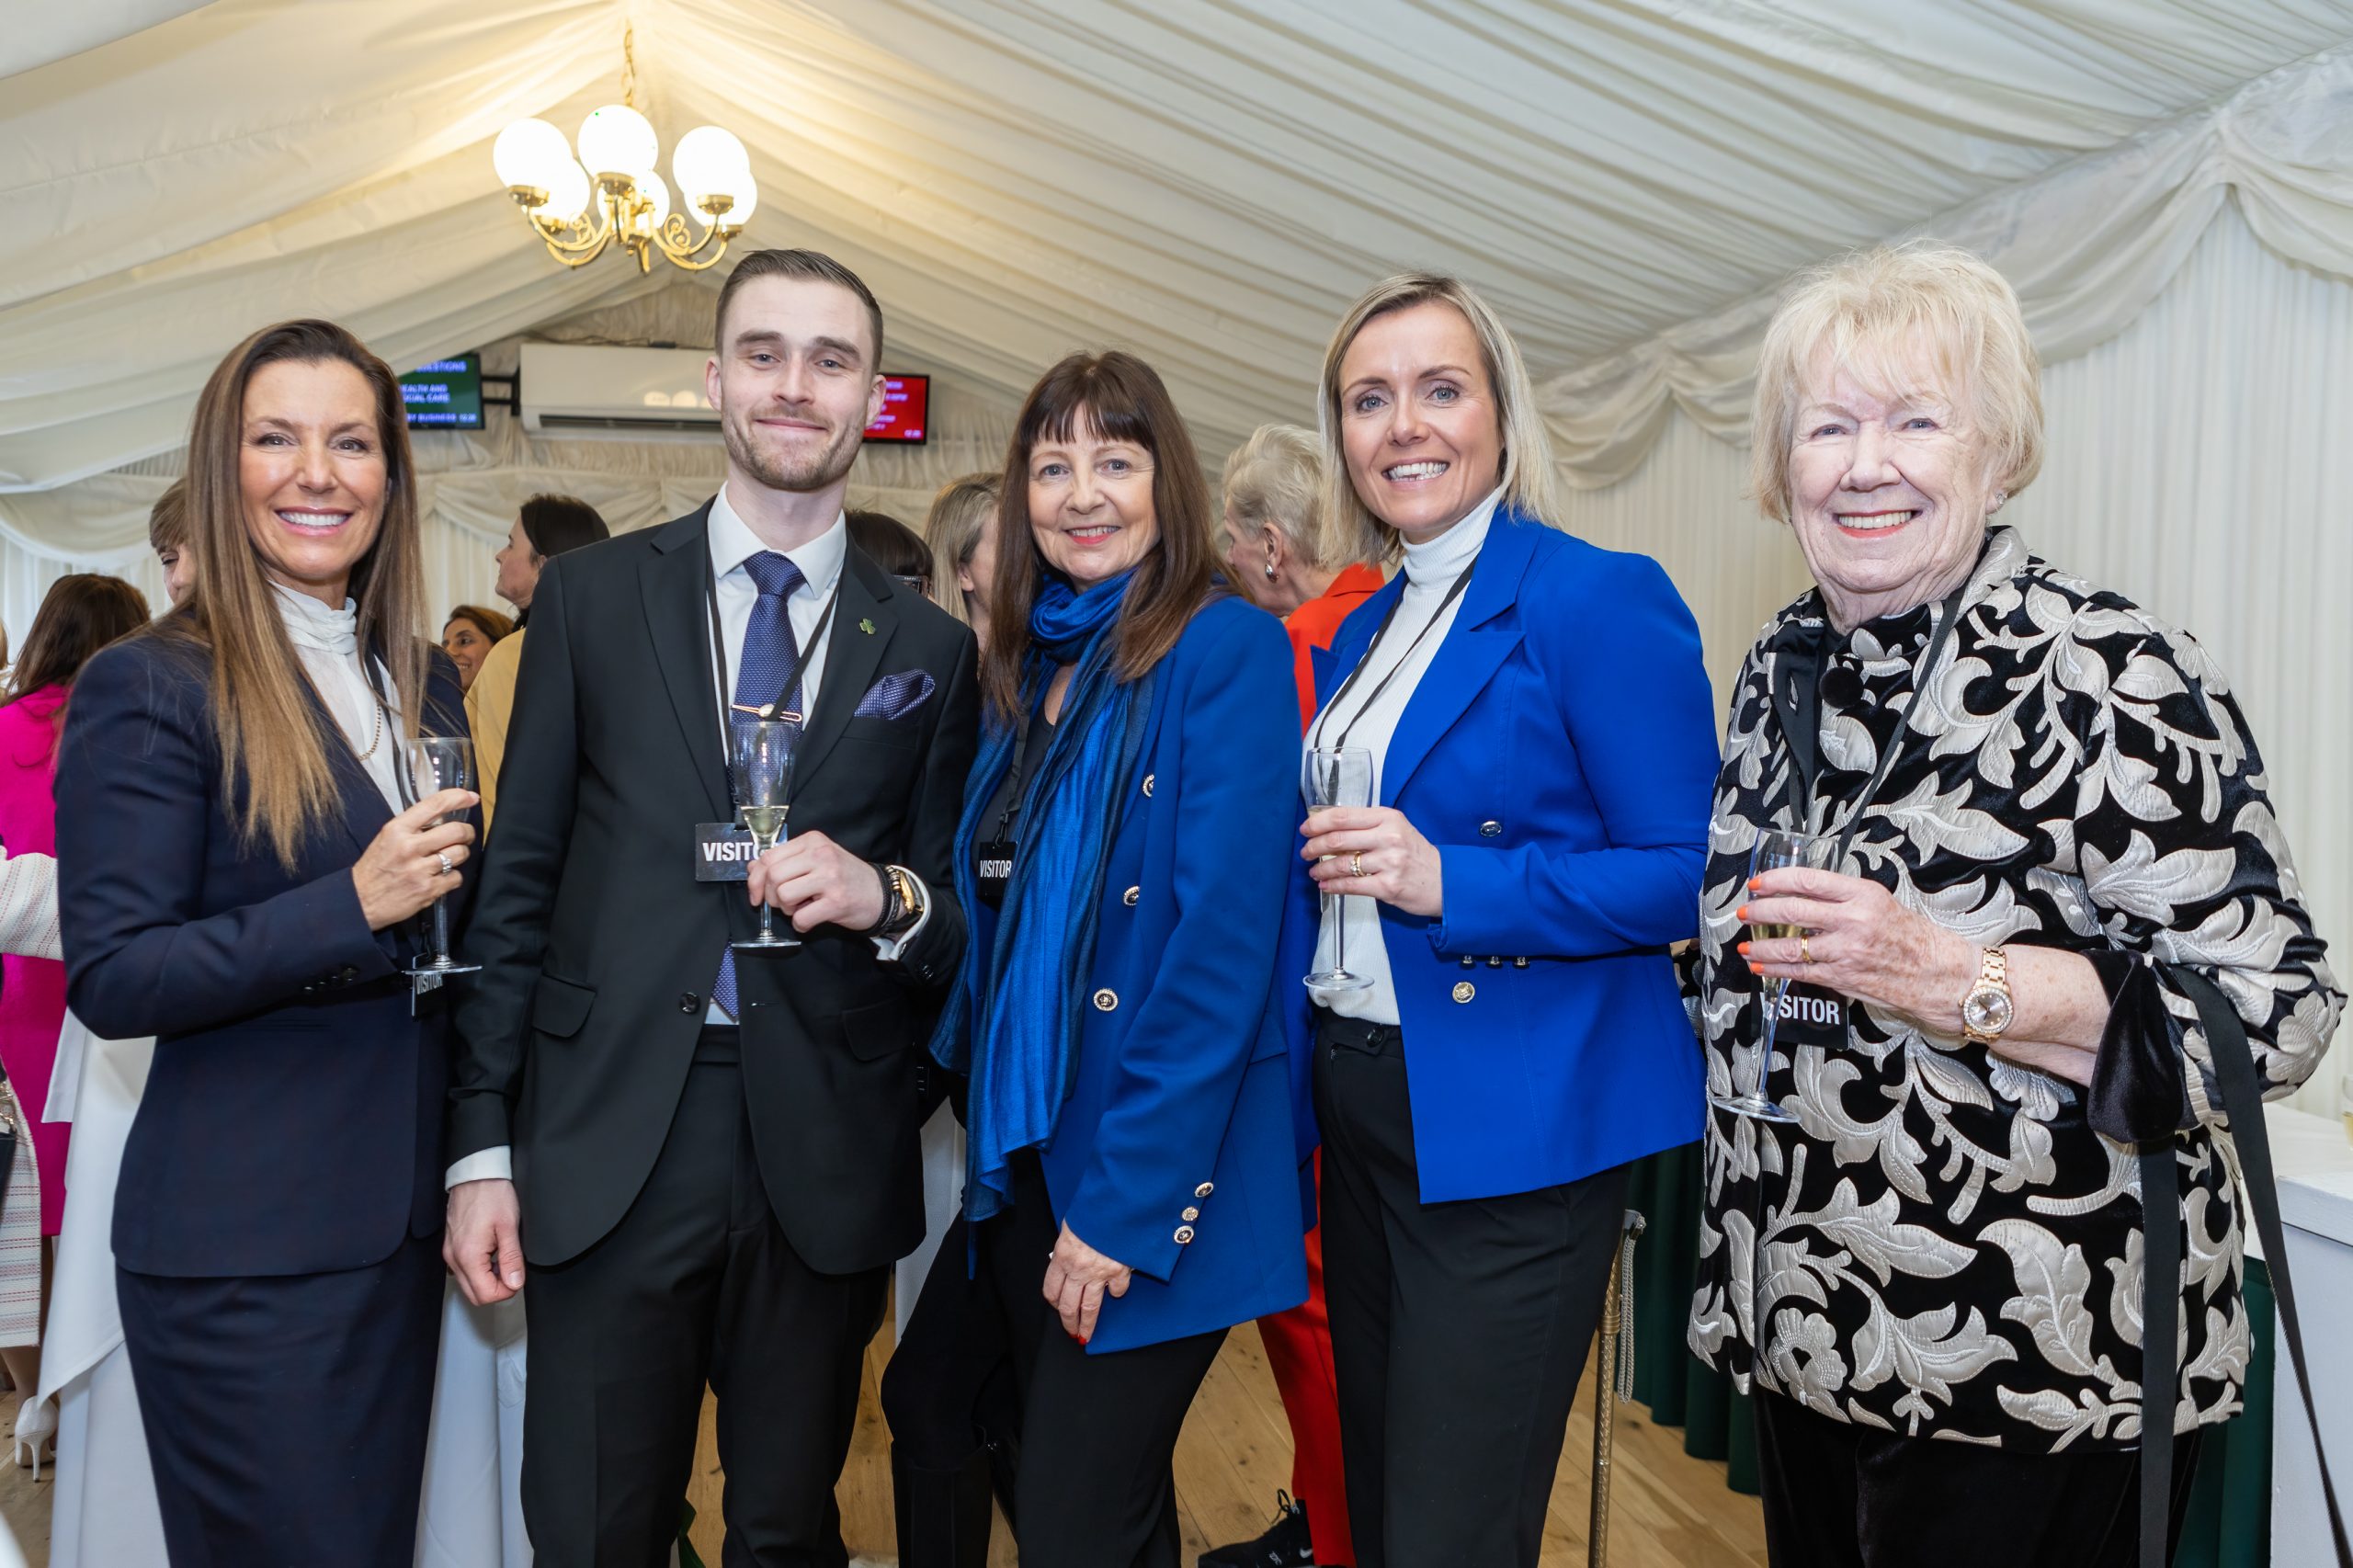 Ladies First Professional Development Awards, House of Commons